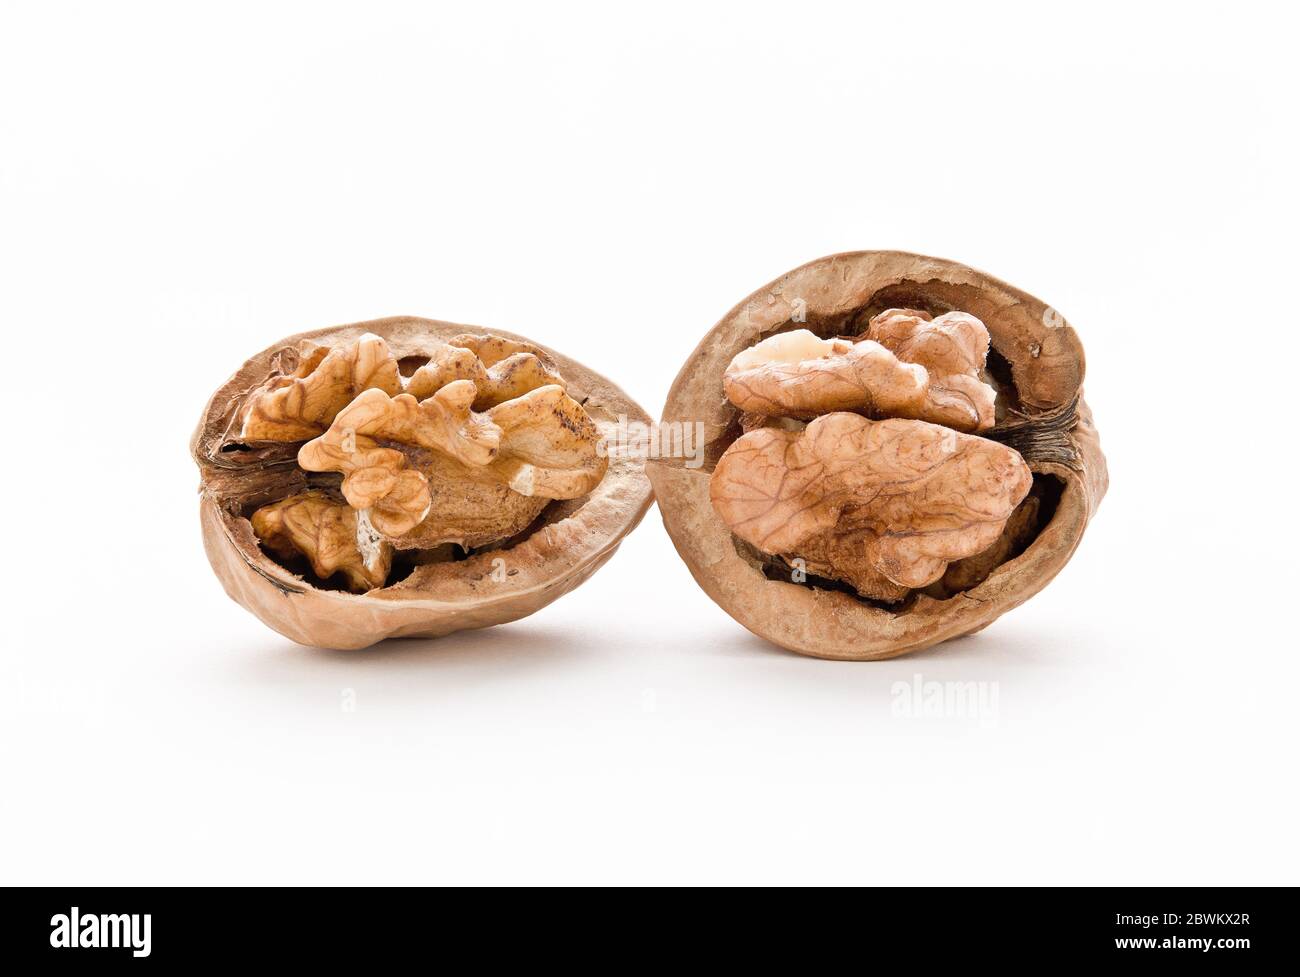 Walnut (fruit) In botany, the term walnut (or nut) is applied to an indehiscent, monosperm, dry fruit with a hard pericarp derived from an infamous ov Stock Photo